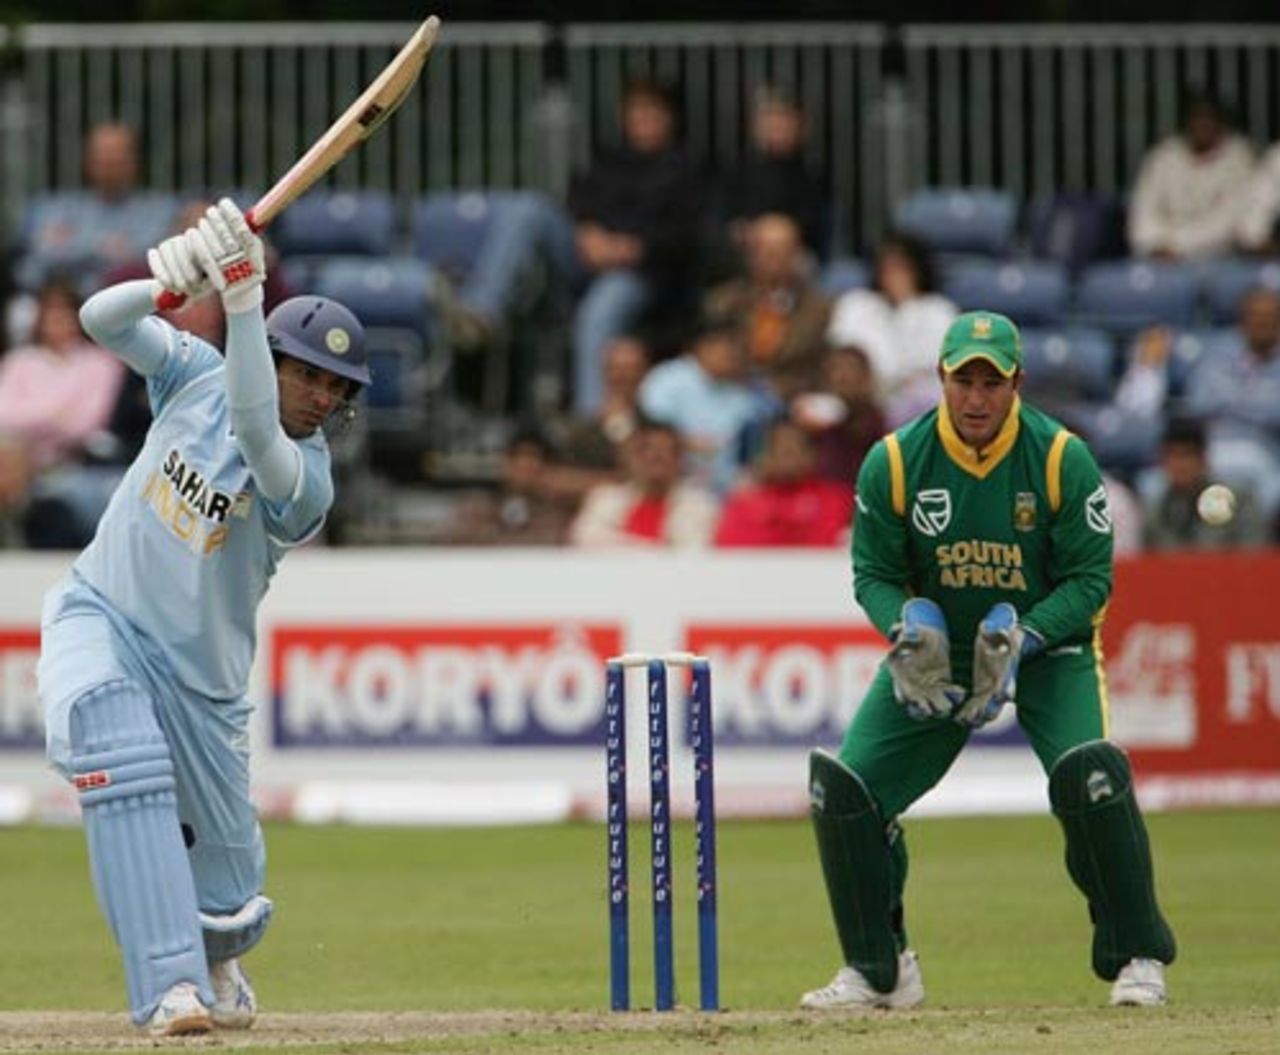 Yuvraj Singh drives during his 49 not out as Mark Boucher looks on, India v Souuth Africa, 2nd ODI, Belfast, June 29, 2007